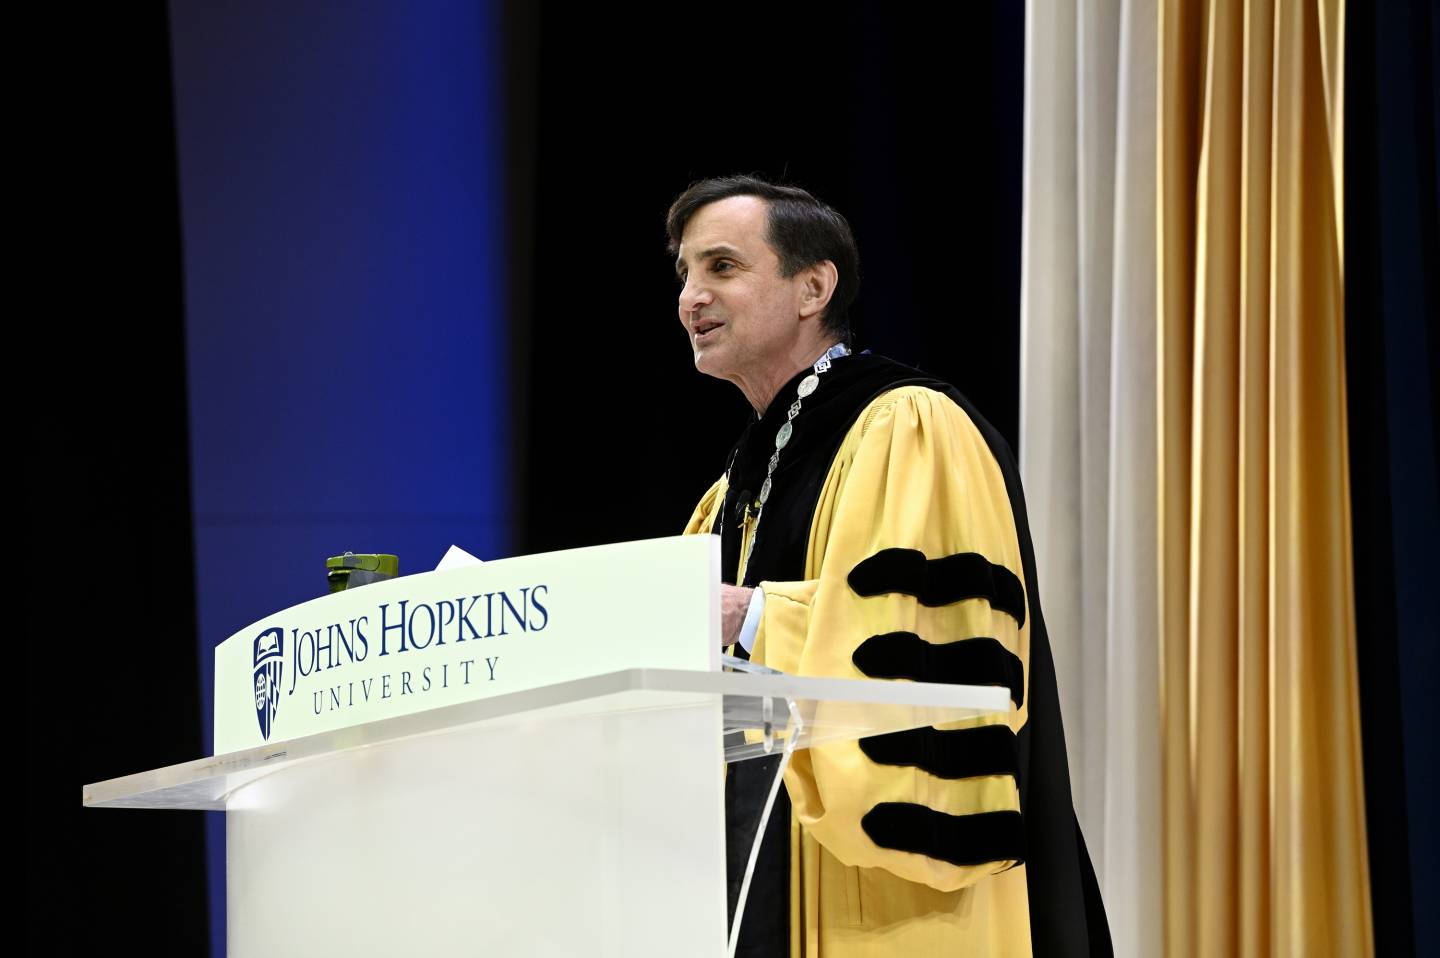 JHU President Daniels wears his customary Commencement regalia to give an address